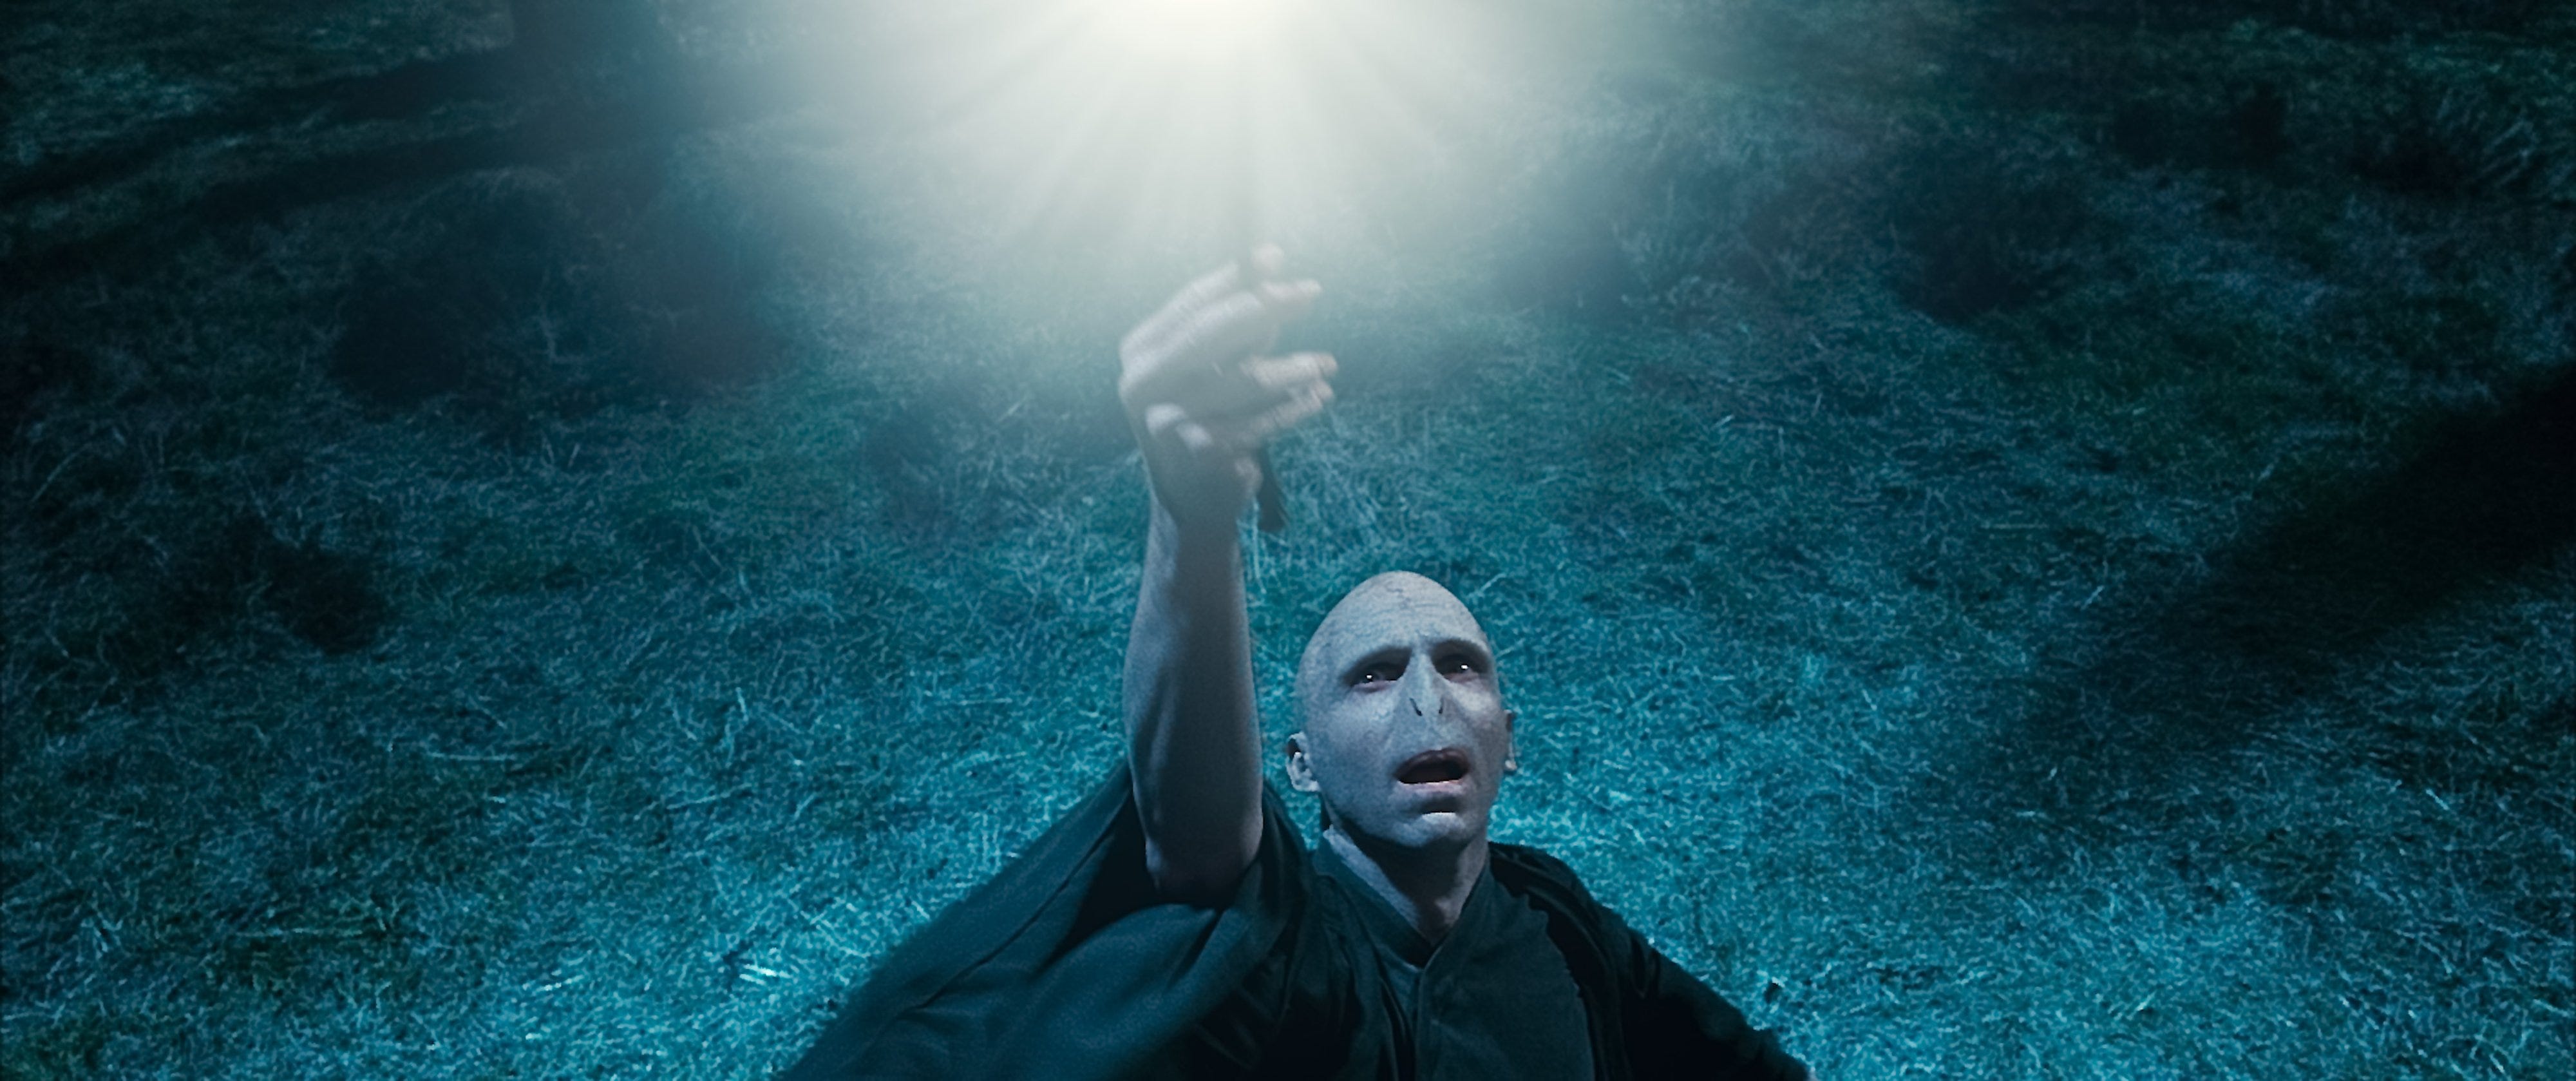 Movie review: 'Harry Potter and the Deathly Hallows: Part 1' is scarier and  better than predecessors